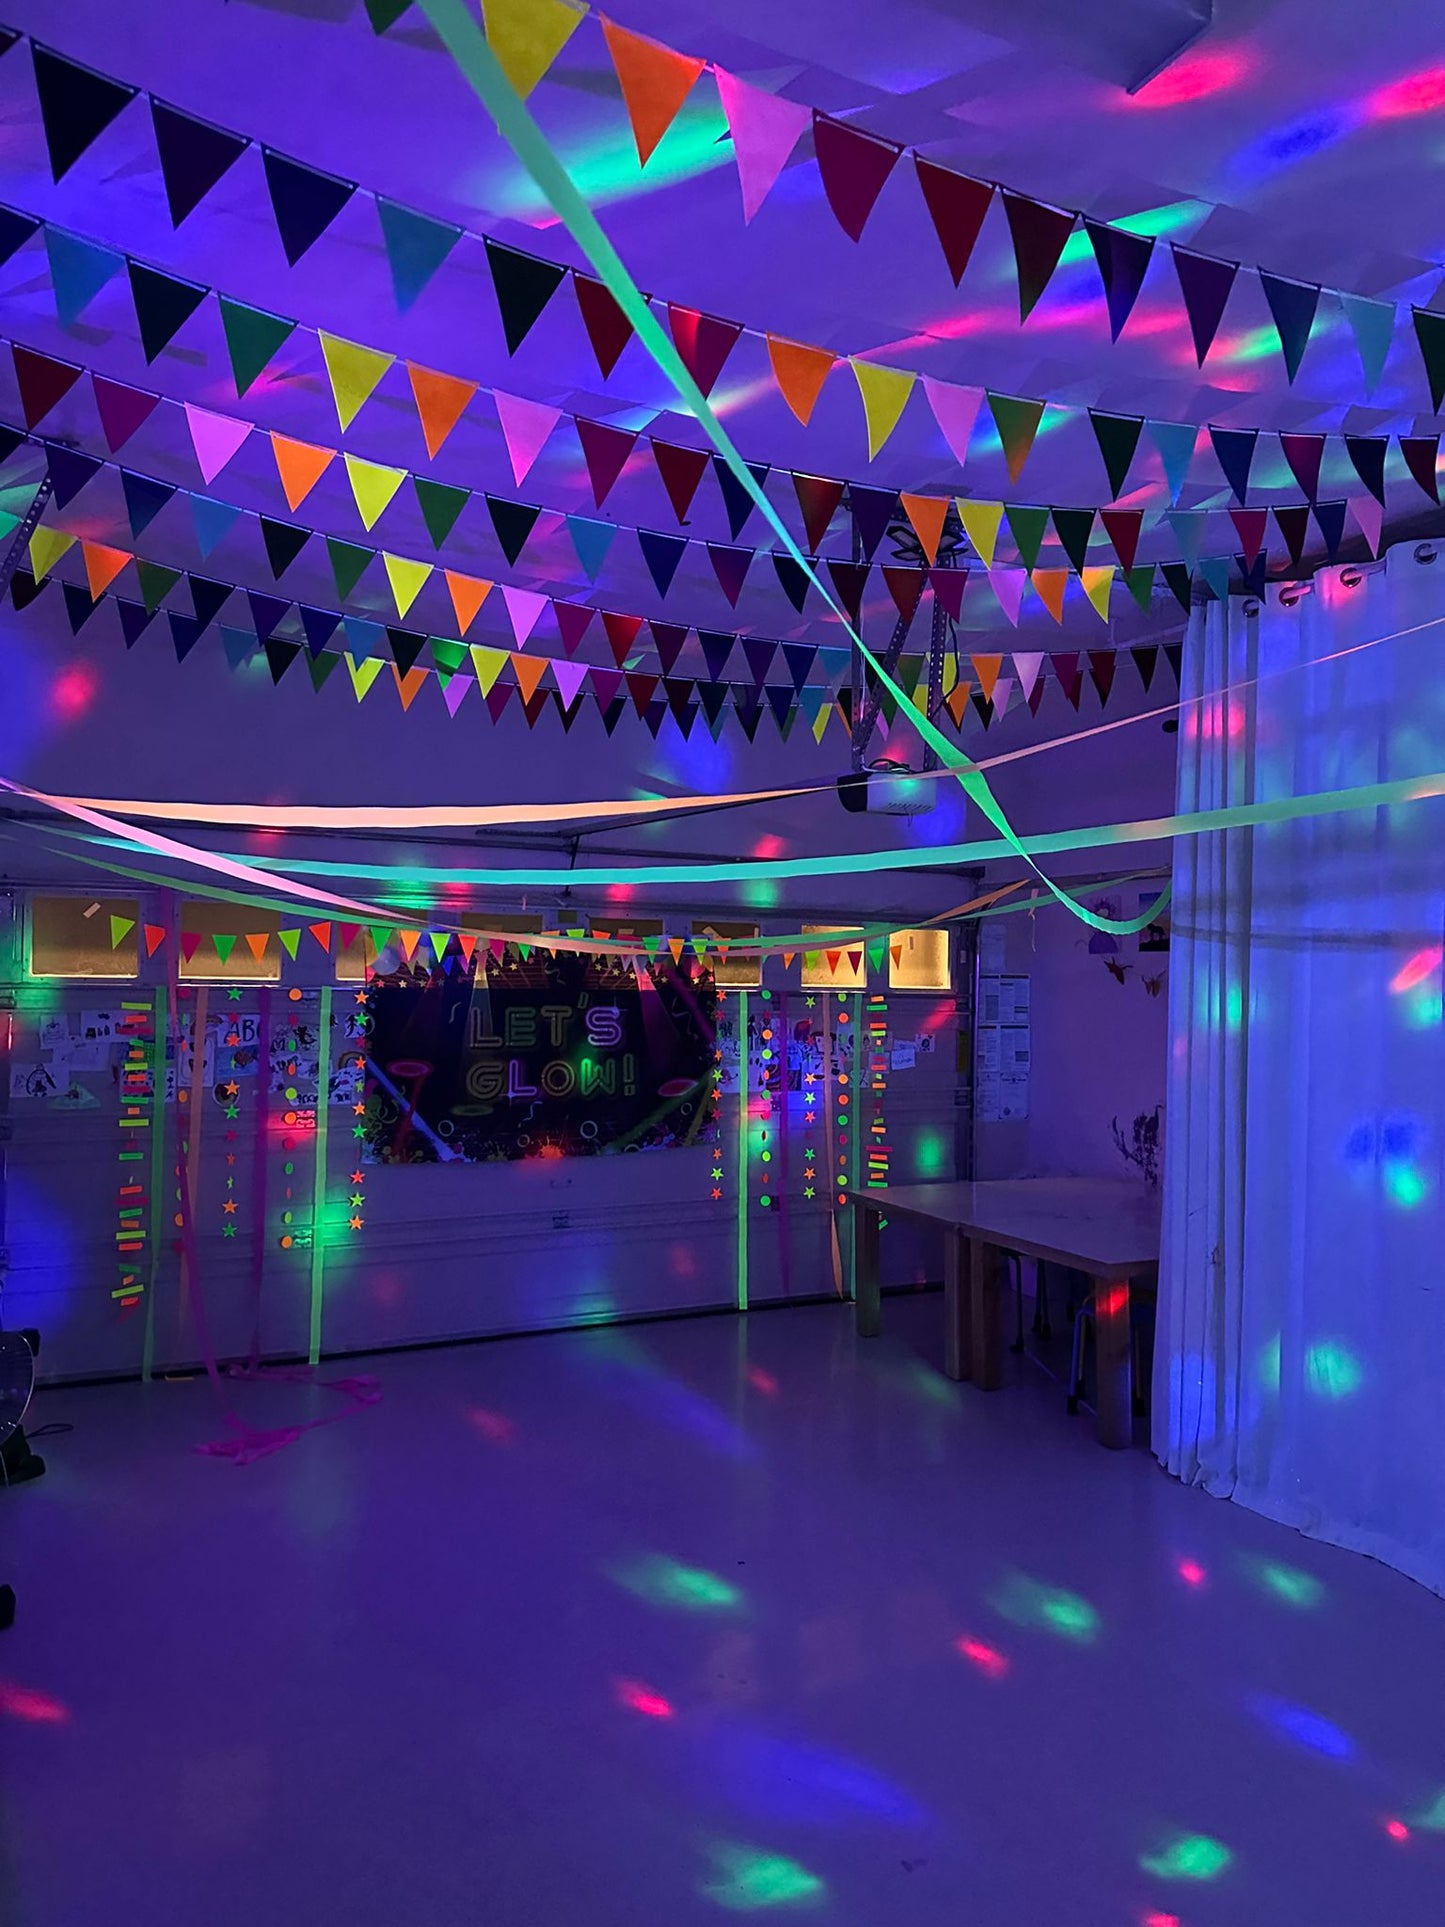 cool glow in the dark party ideas